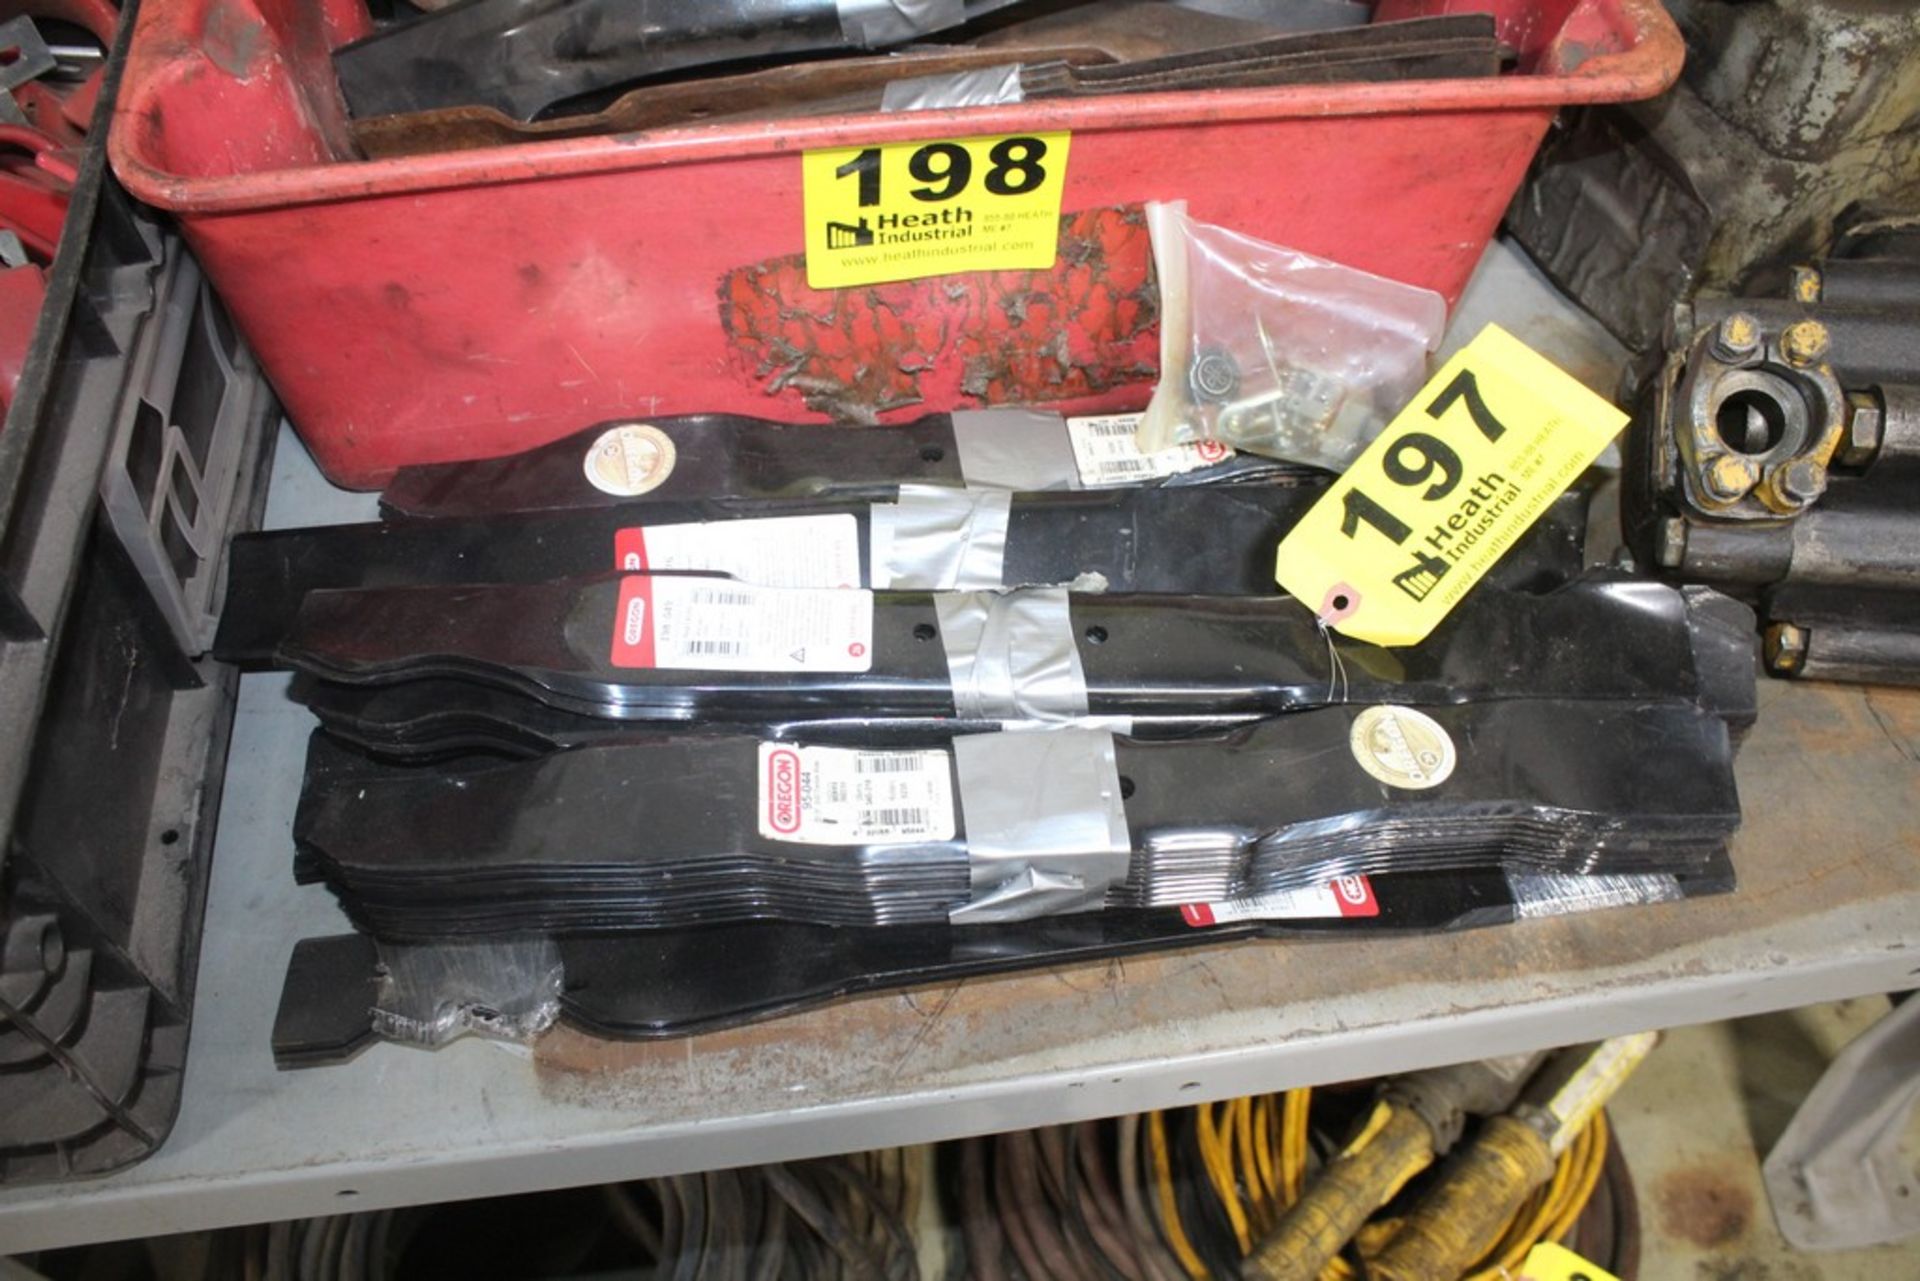 LARGE QUANTITY OF OREGON REPLACEMENT MOWER BLADES, VARIOUS SIZES